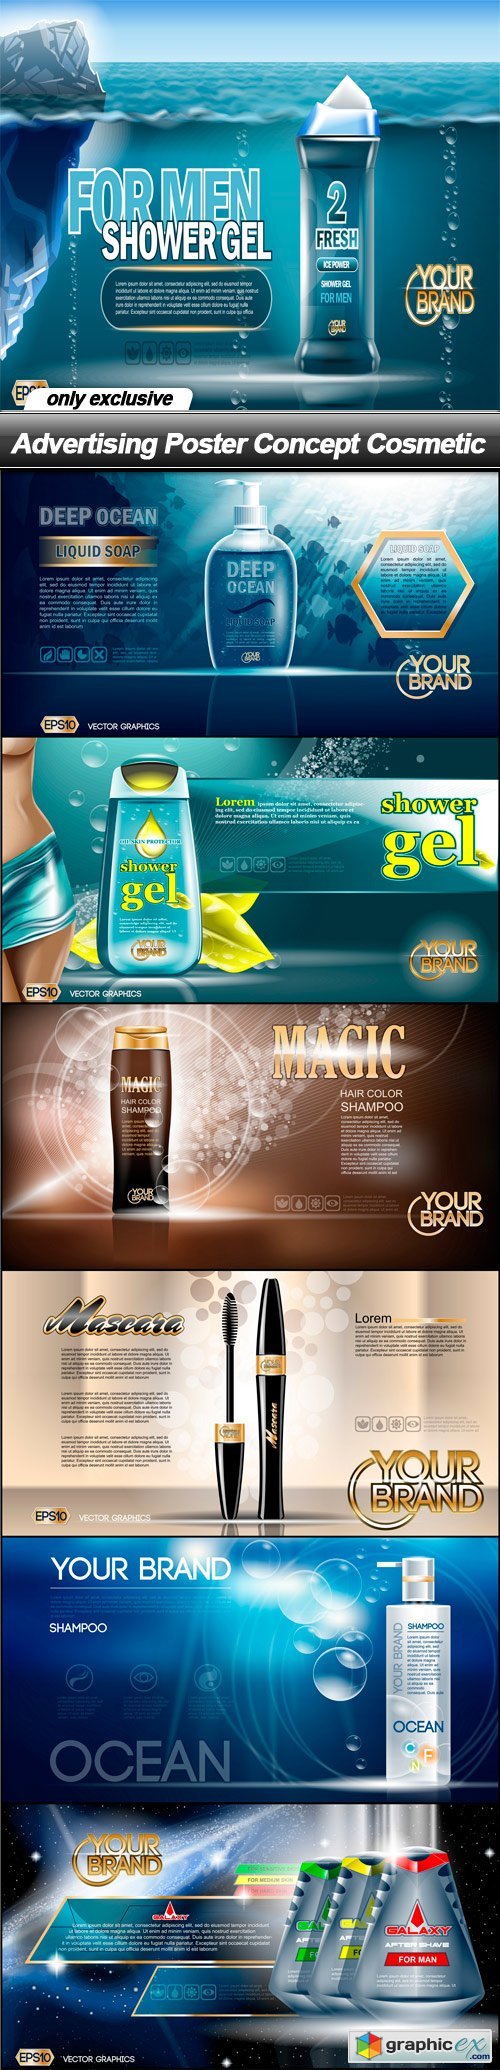 Advertising Poster Concept Cosmetic - 7 EPS